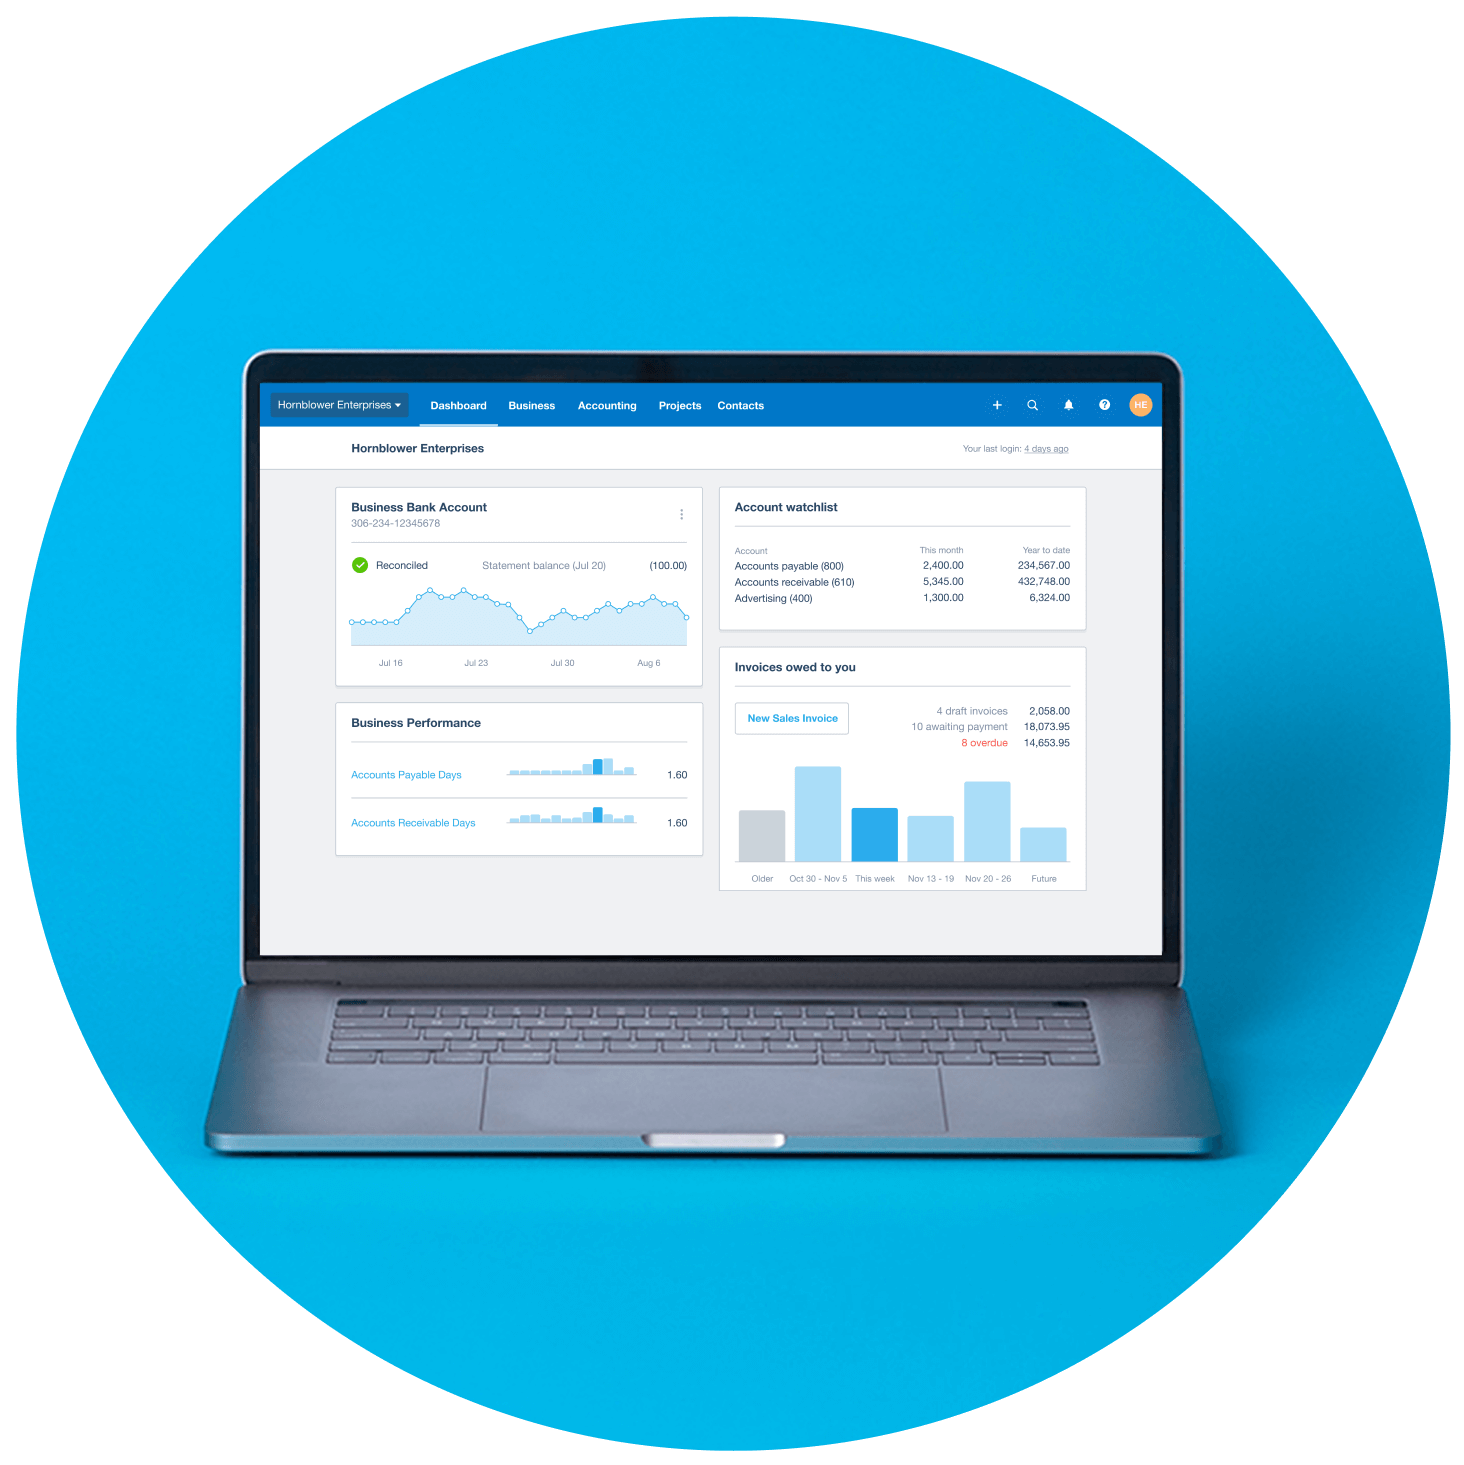 The Xero dashboard shows bank balances, the amount of invoices owed to you and an accounts watchlist.